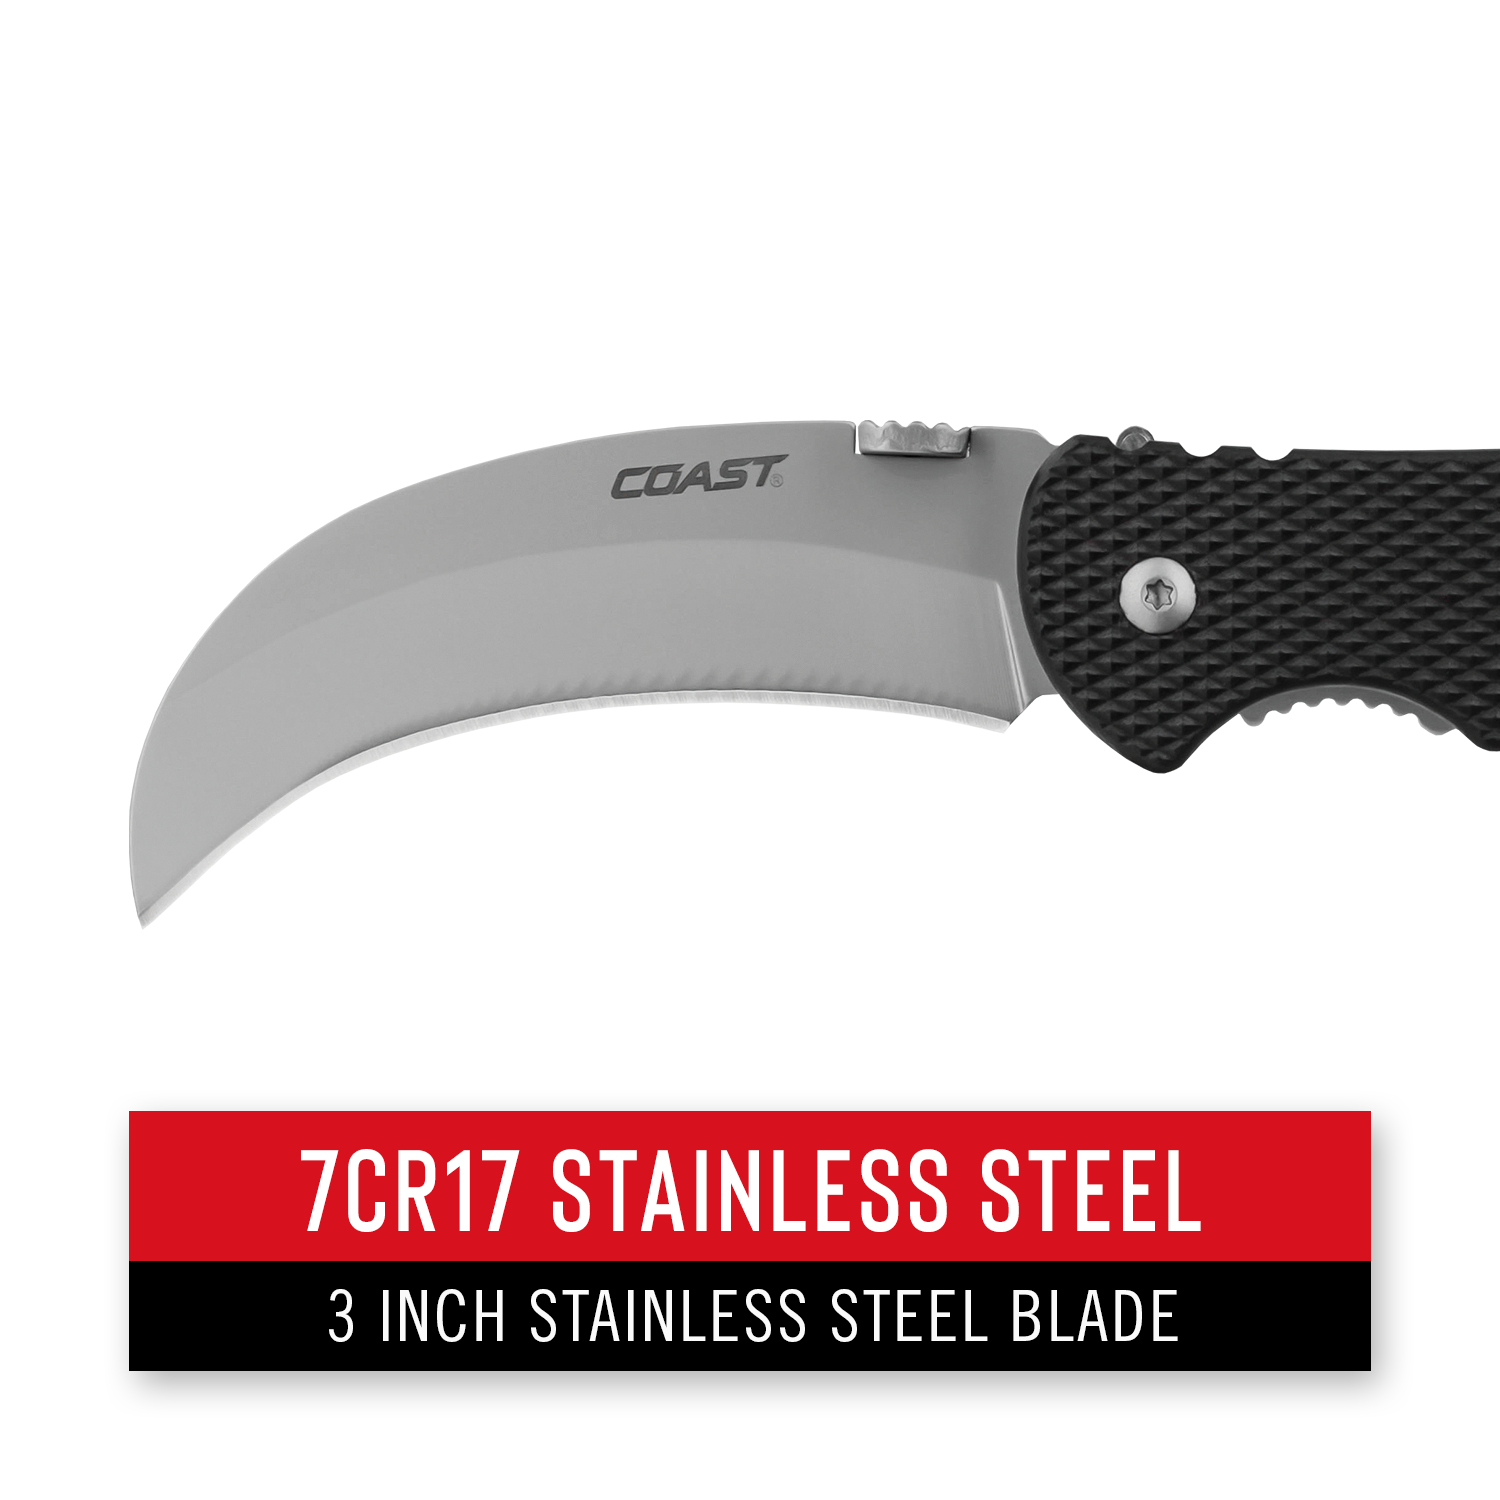 COAST DX300 Double Lock Stainless Steel Folding Knife with Hooked Blade –  COAST Products